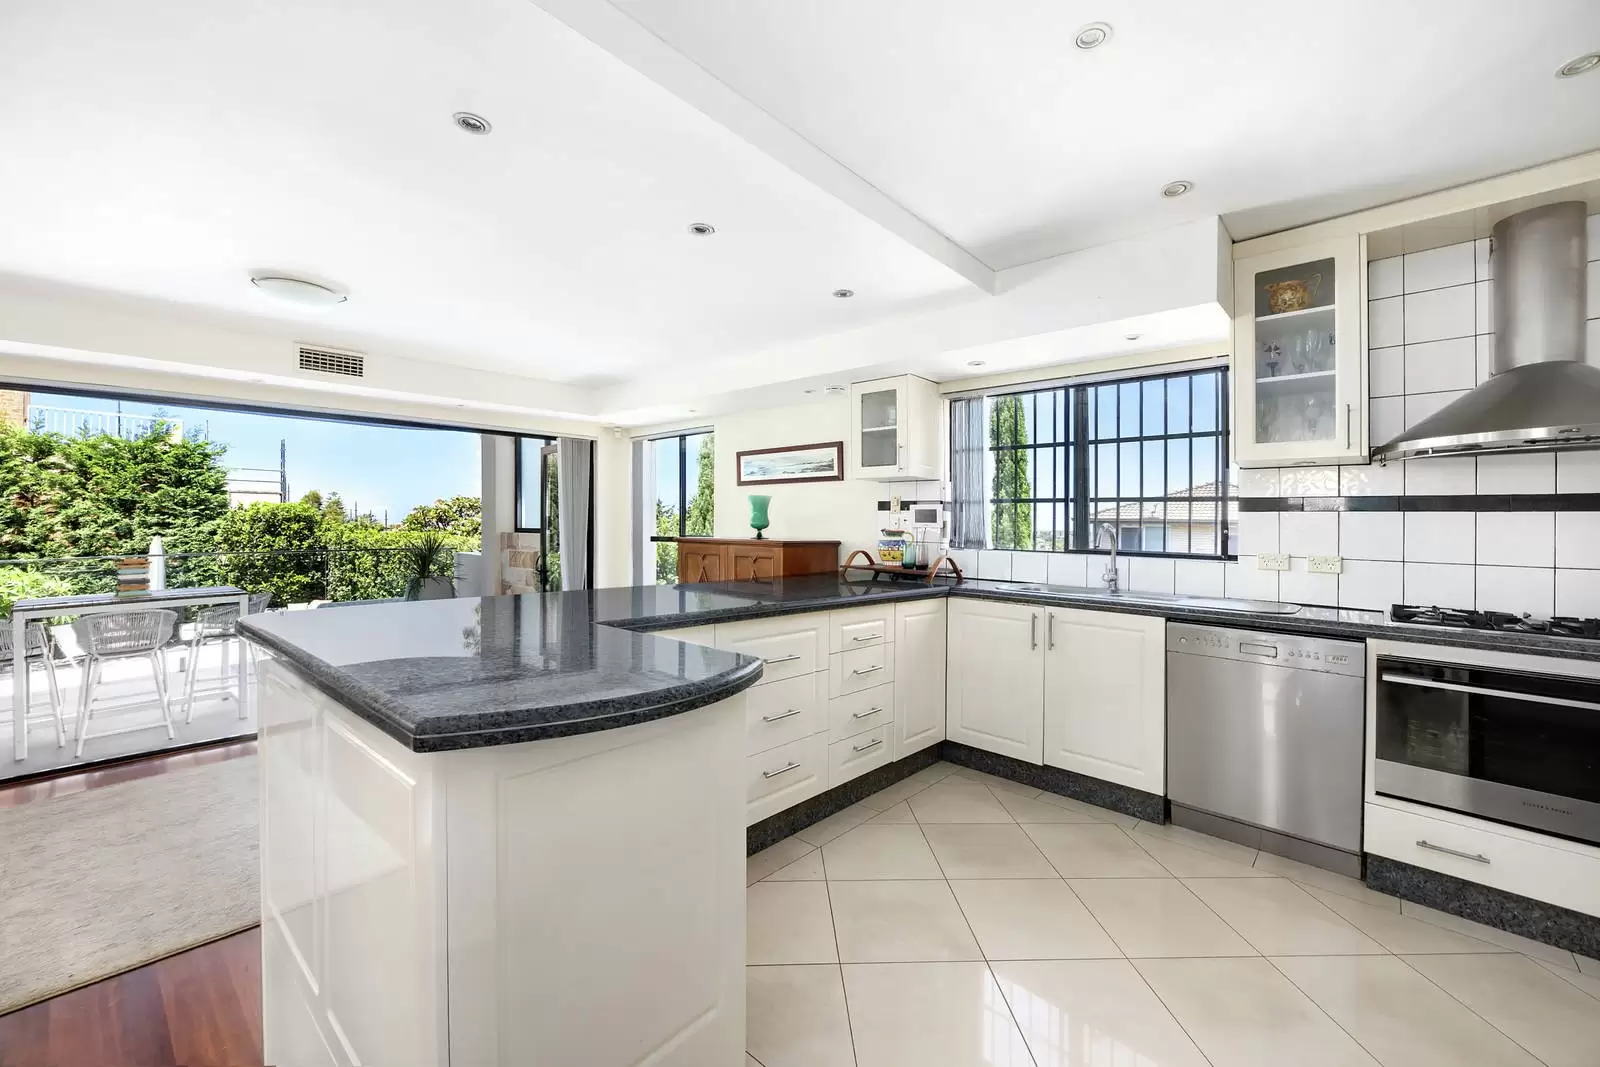 Photo #8: 379 Malabar Road, Maroubra - Sold by Sydney Sotheby's International Realty